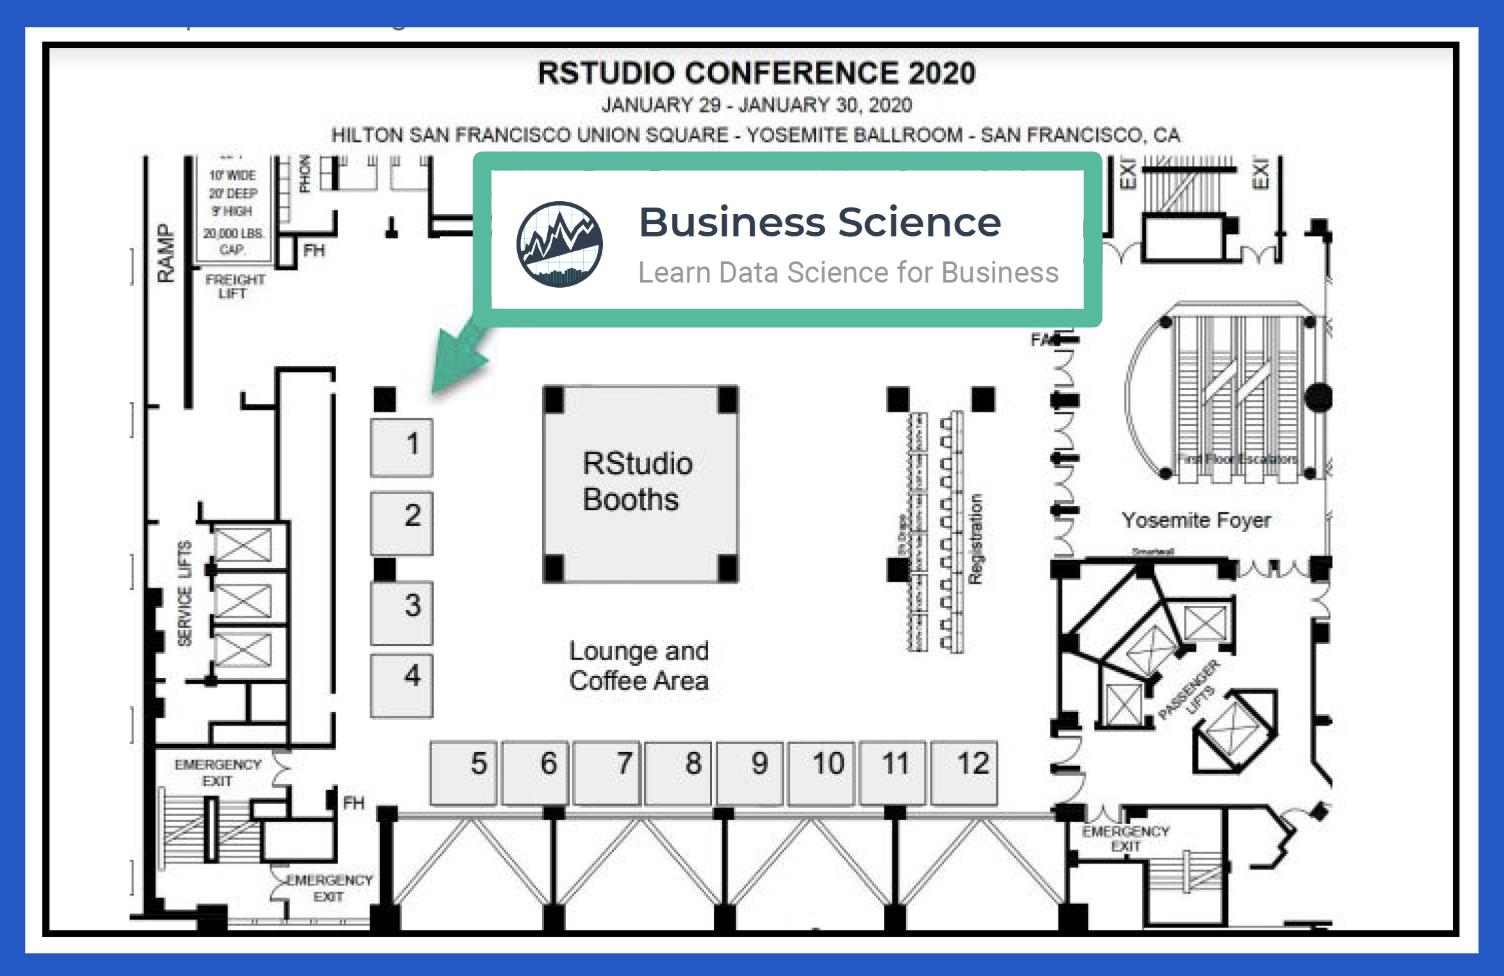 Business Science Booth